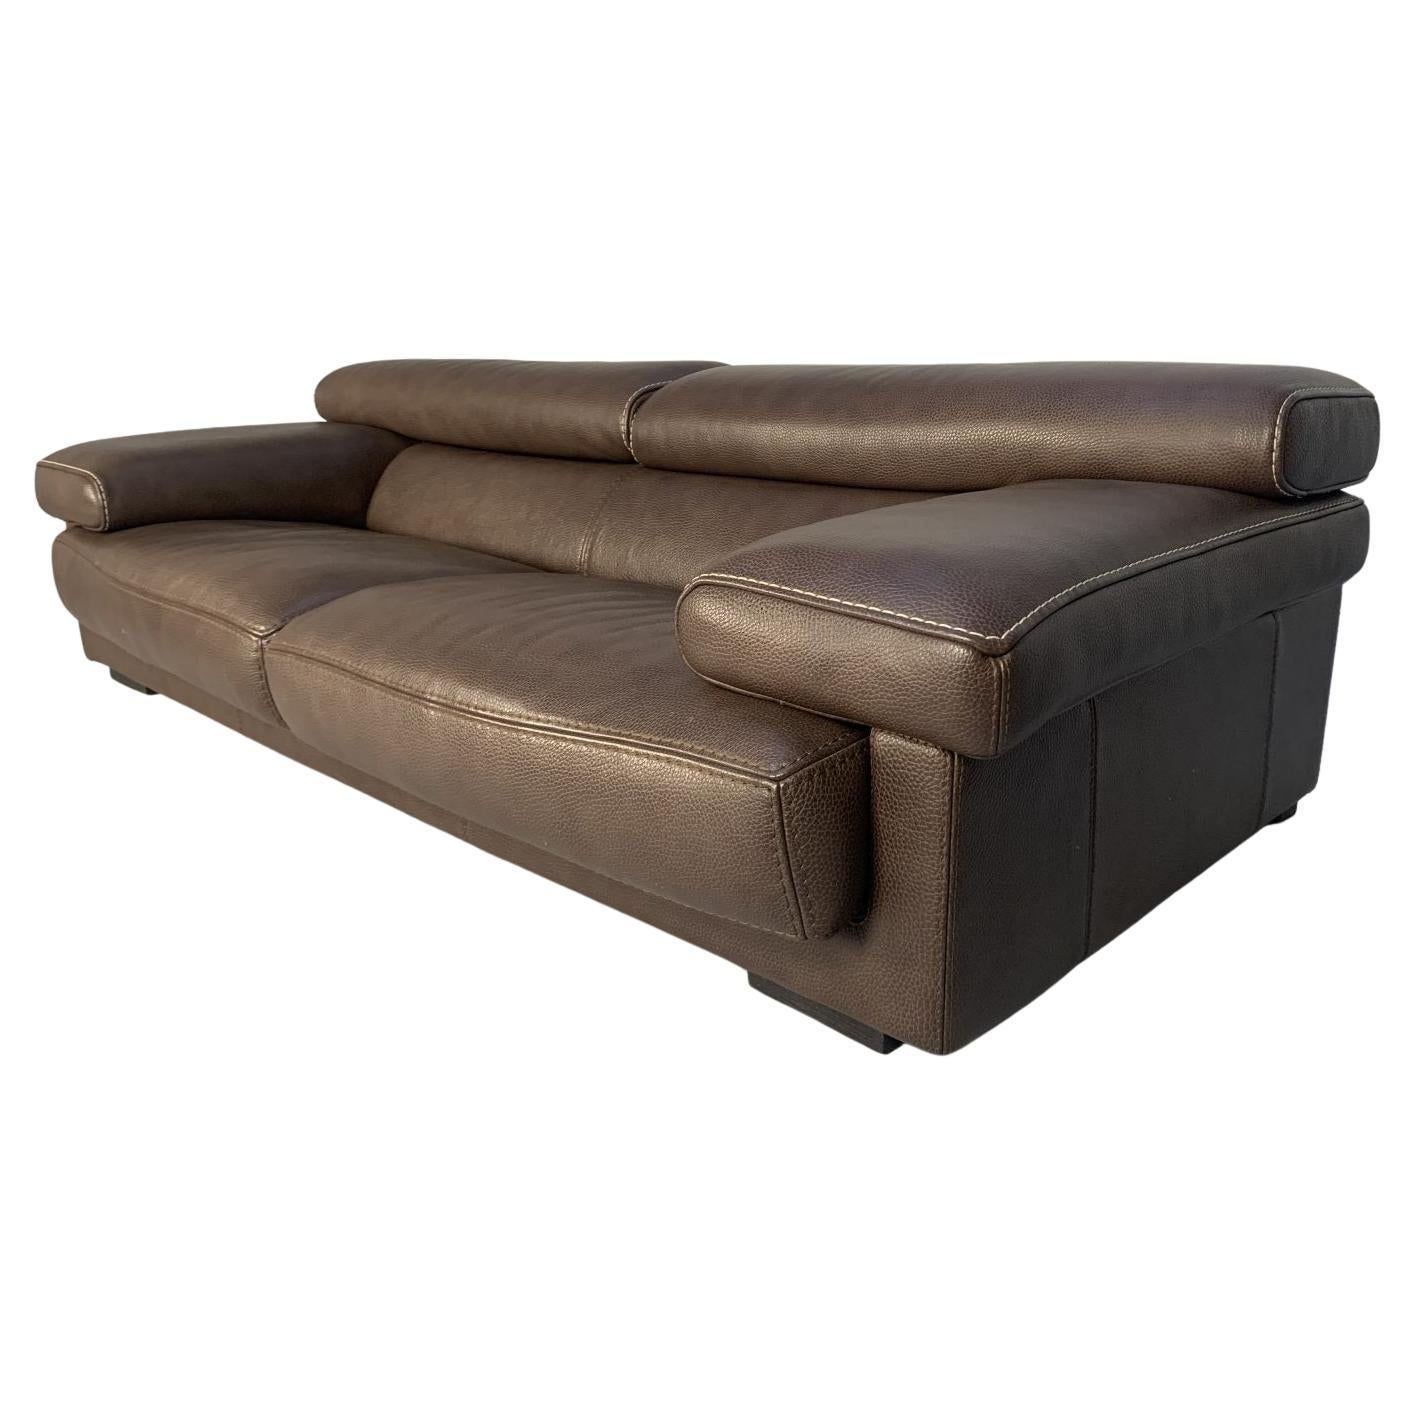 Roche Bobois 3-Seat Sofa in Dark Brown Leather For Sale at 1stDibs